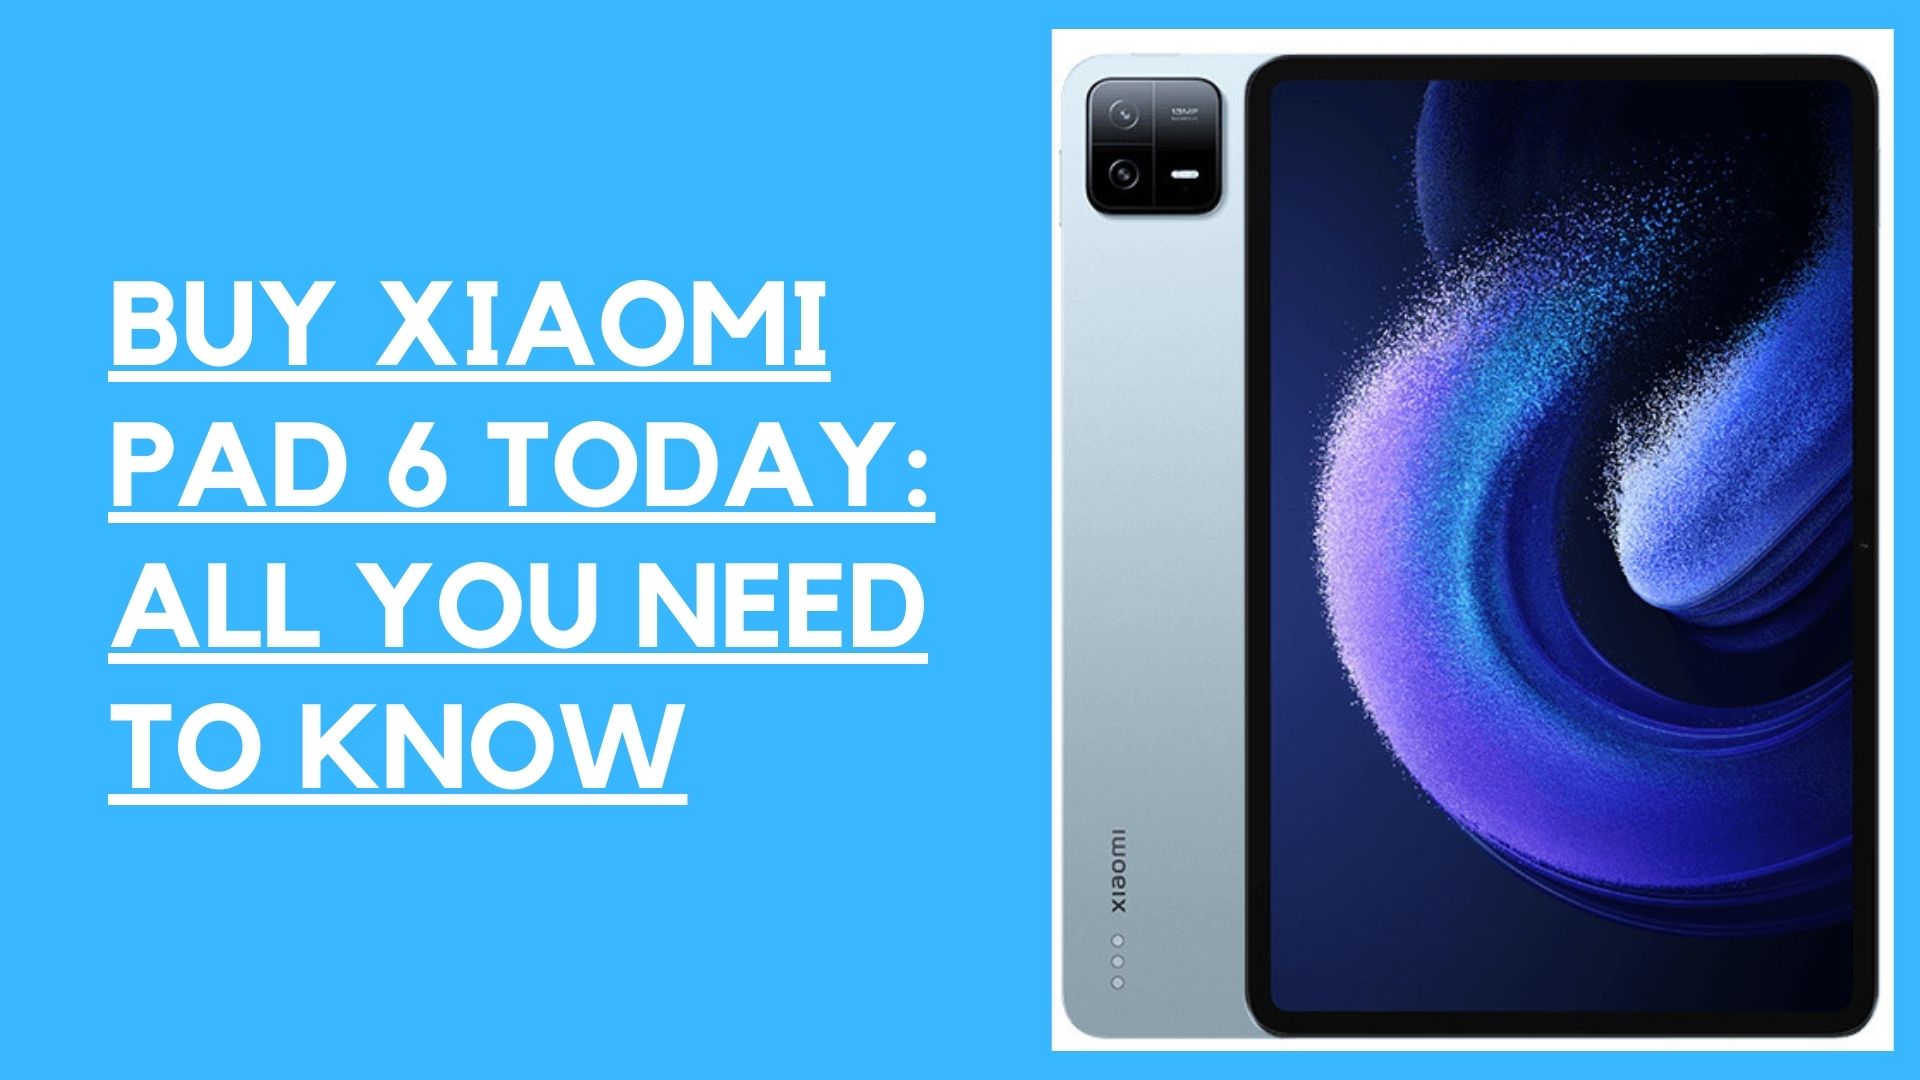 HOW TO BUY XIAOMI PAD 6 OUTSIDE CHINA